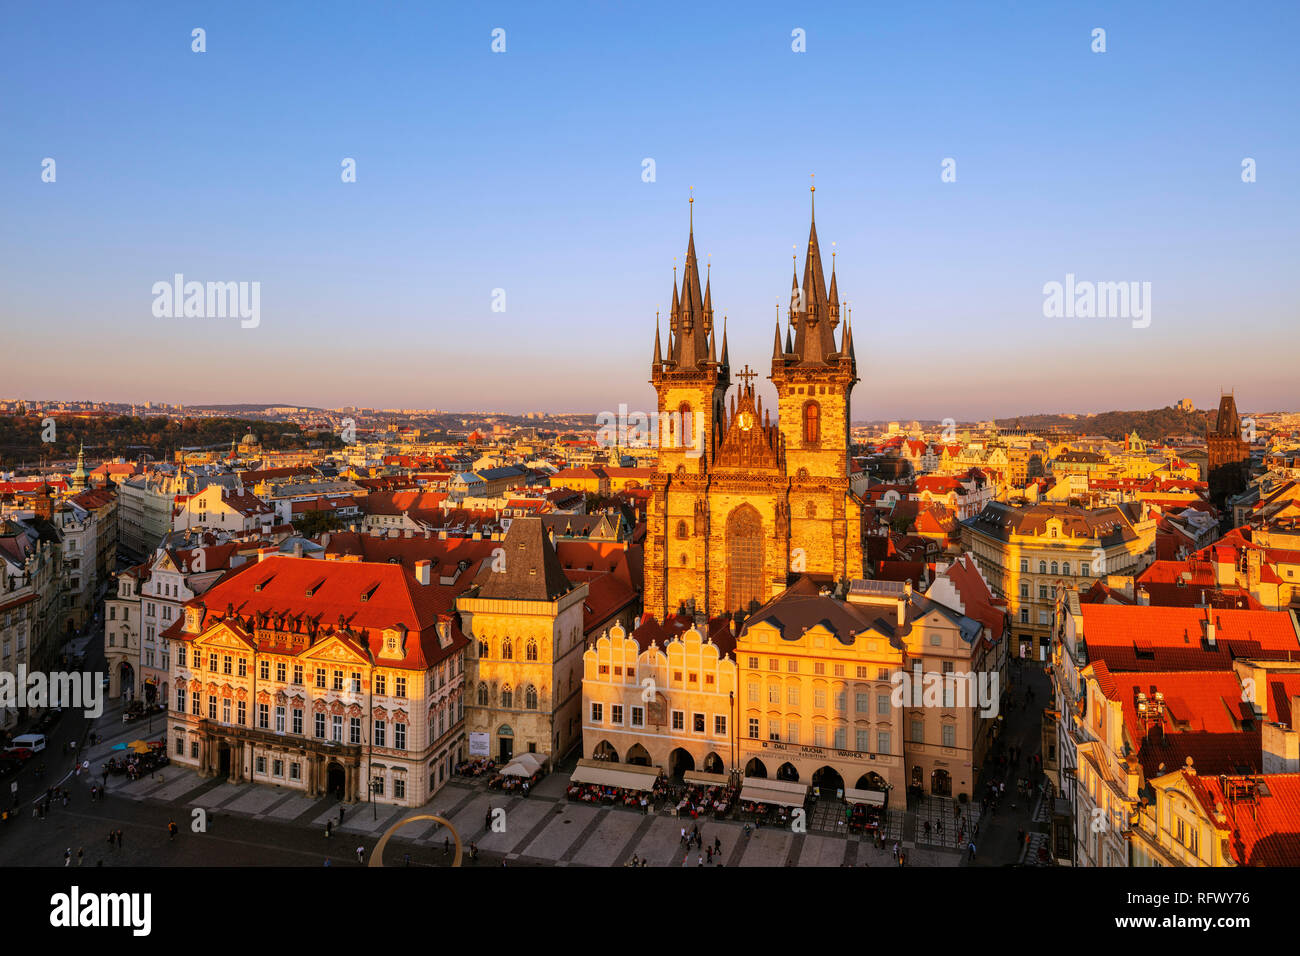 Old Town Square, Our Lady before Tyn church, UNESCO World Heritage Site, Prague, Czech Republic, Europe Stock Photo